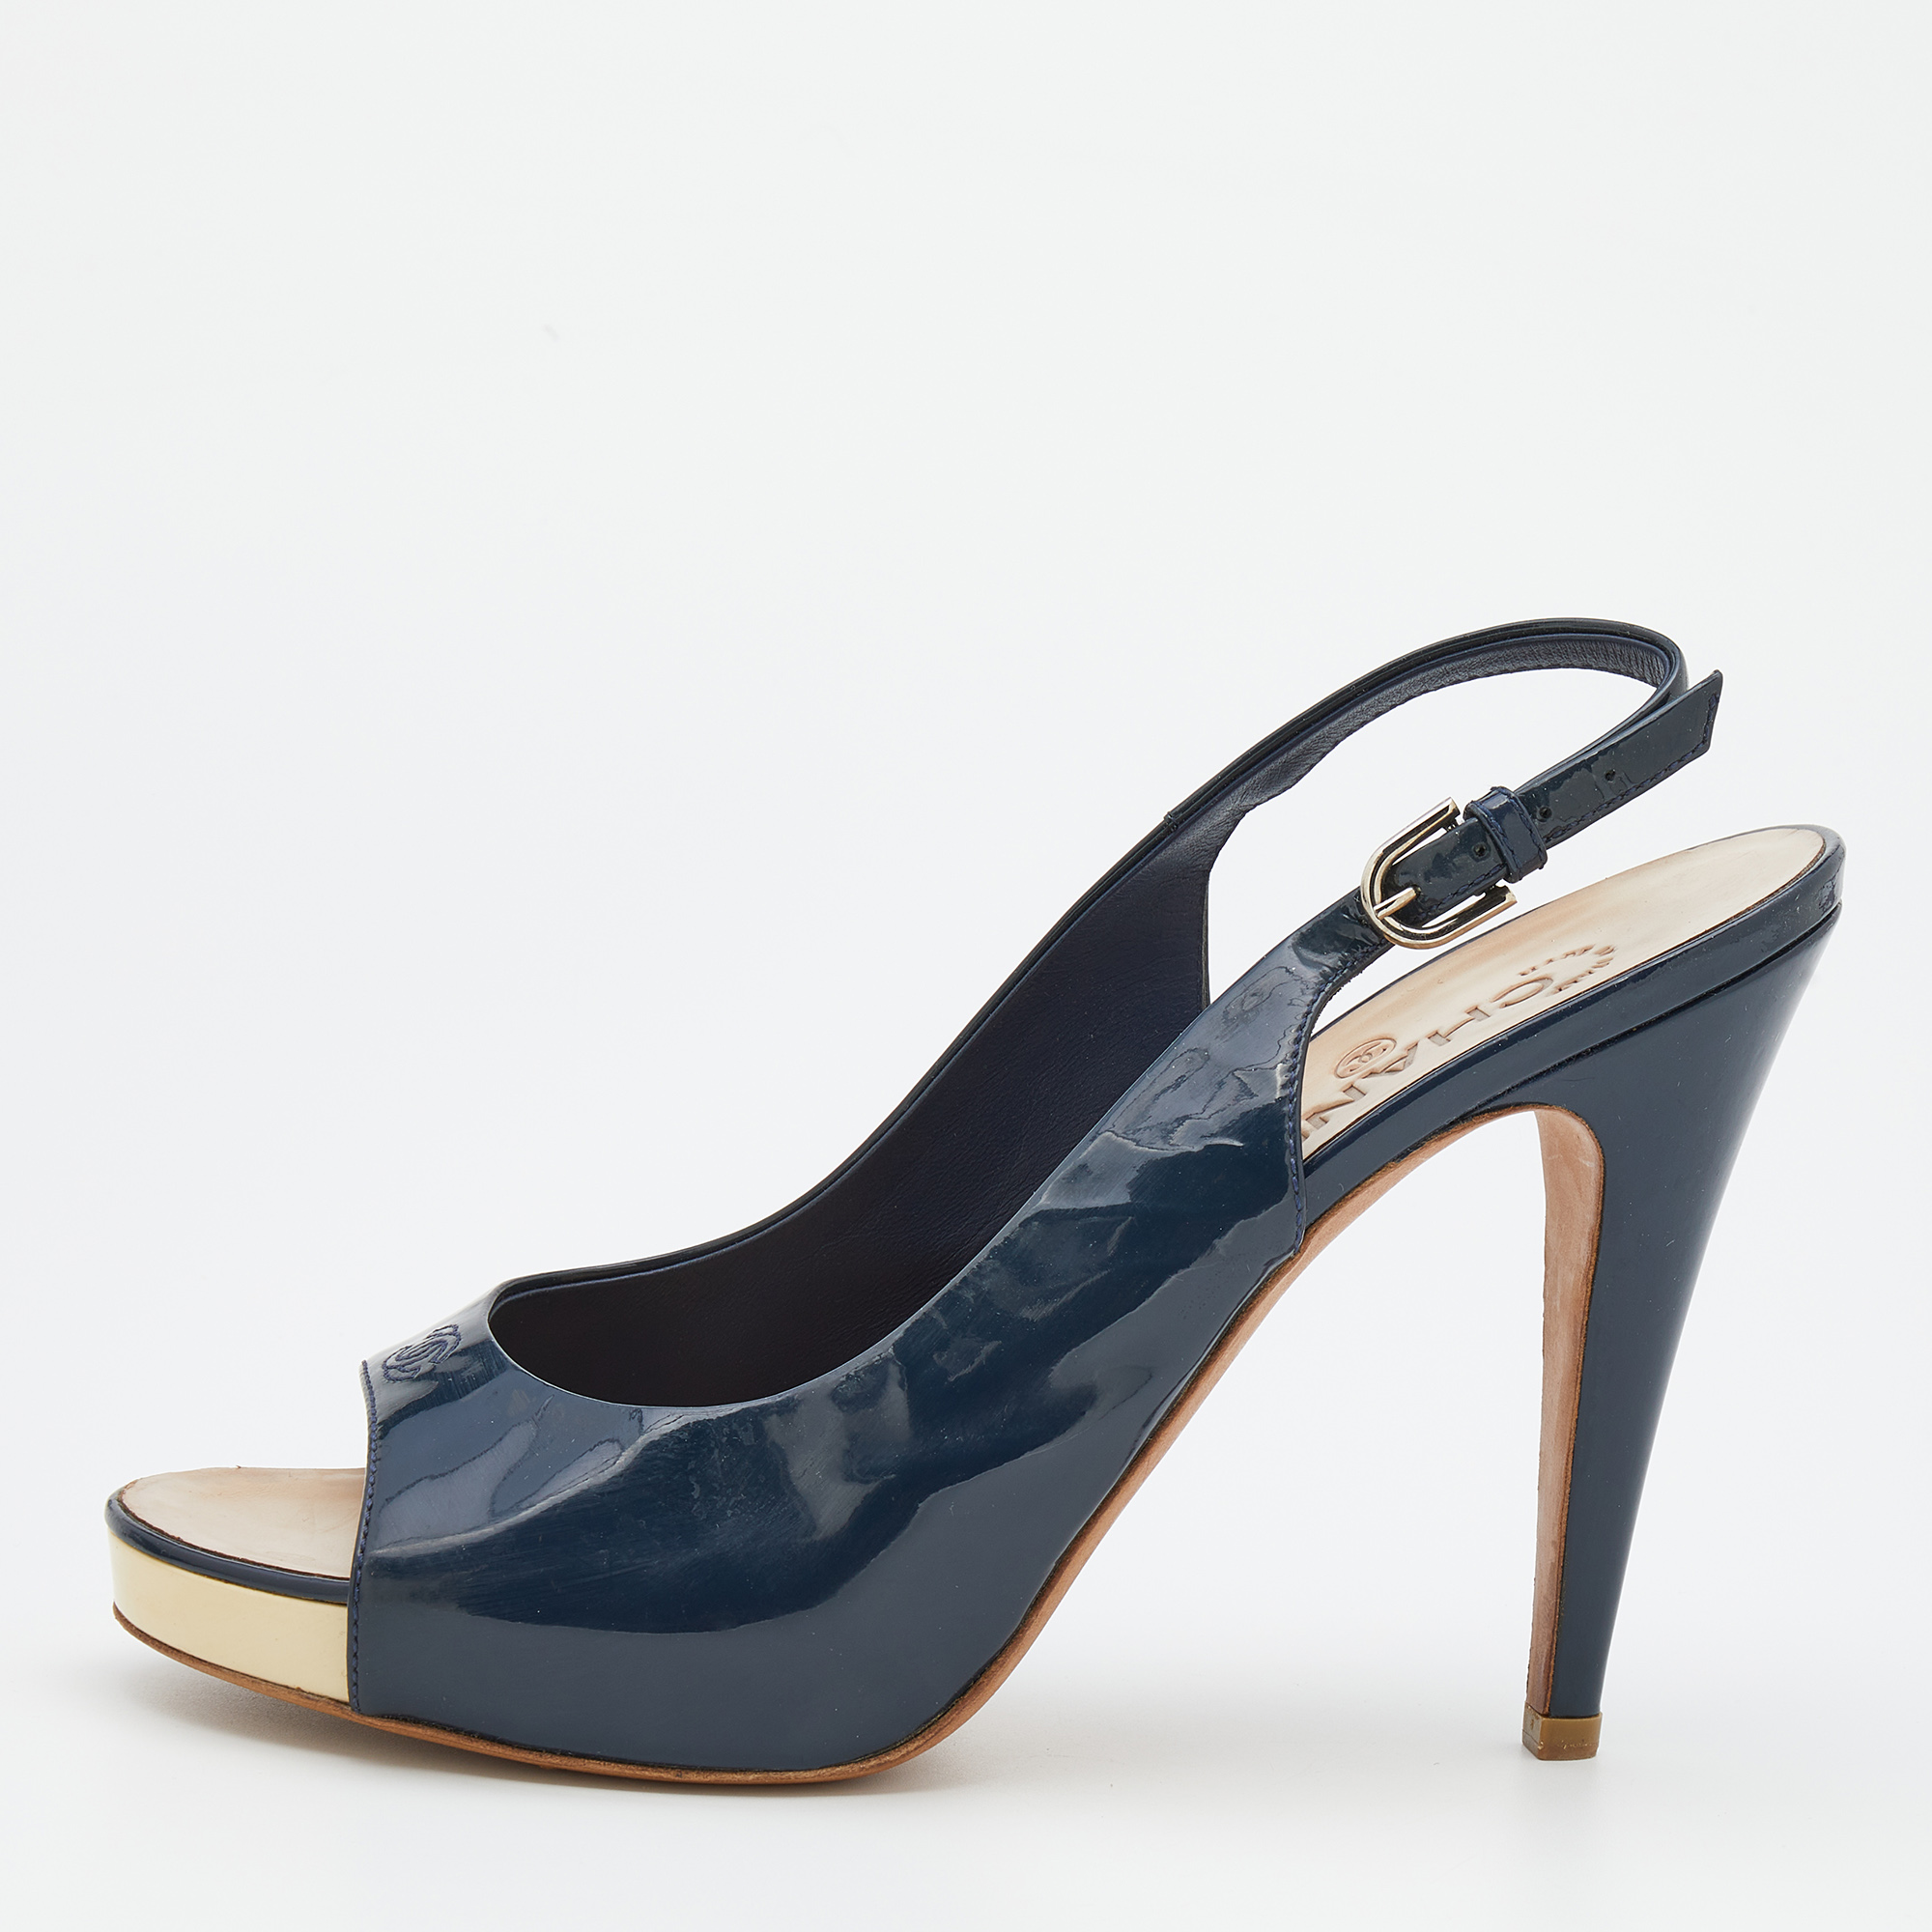 Pre-owned Chanel Navy Blue Patent Leather Cc Open Toe Platform Slingback Sandals Size 41.5